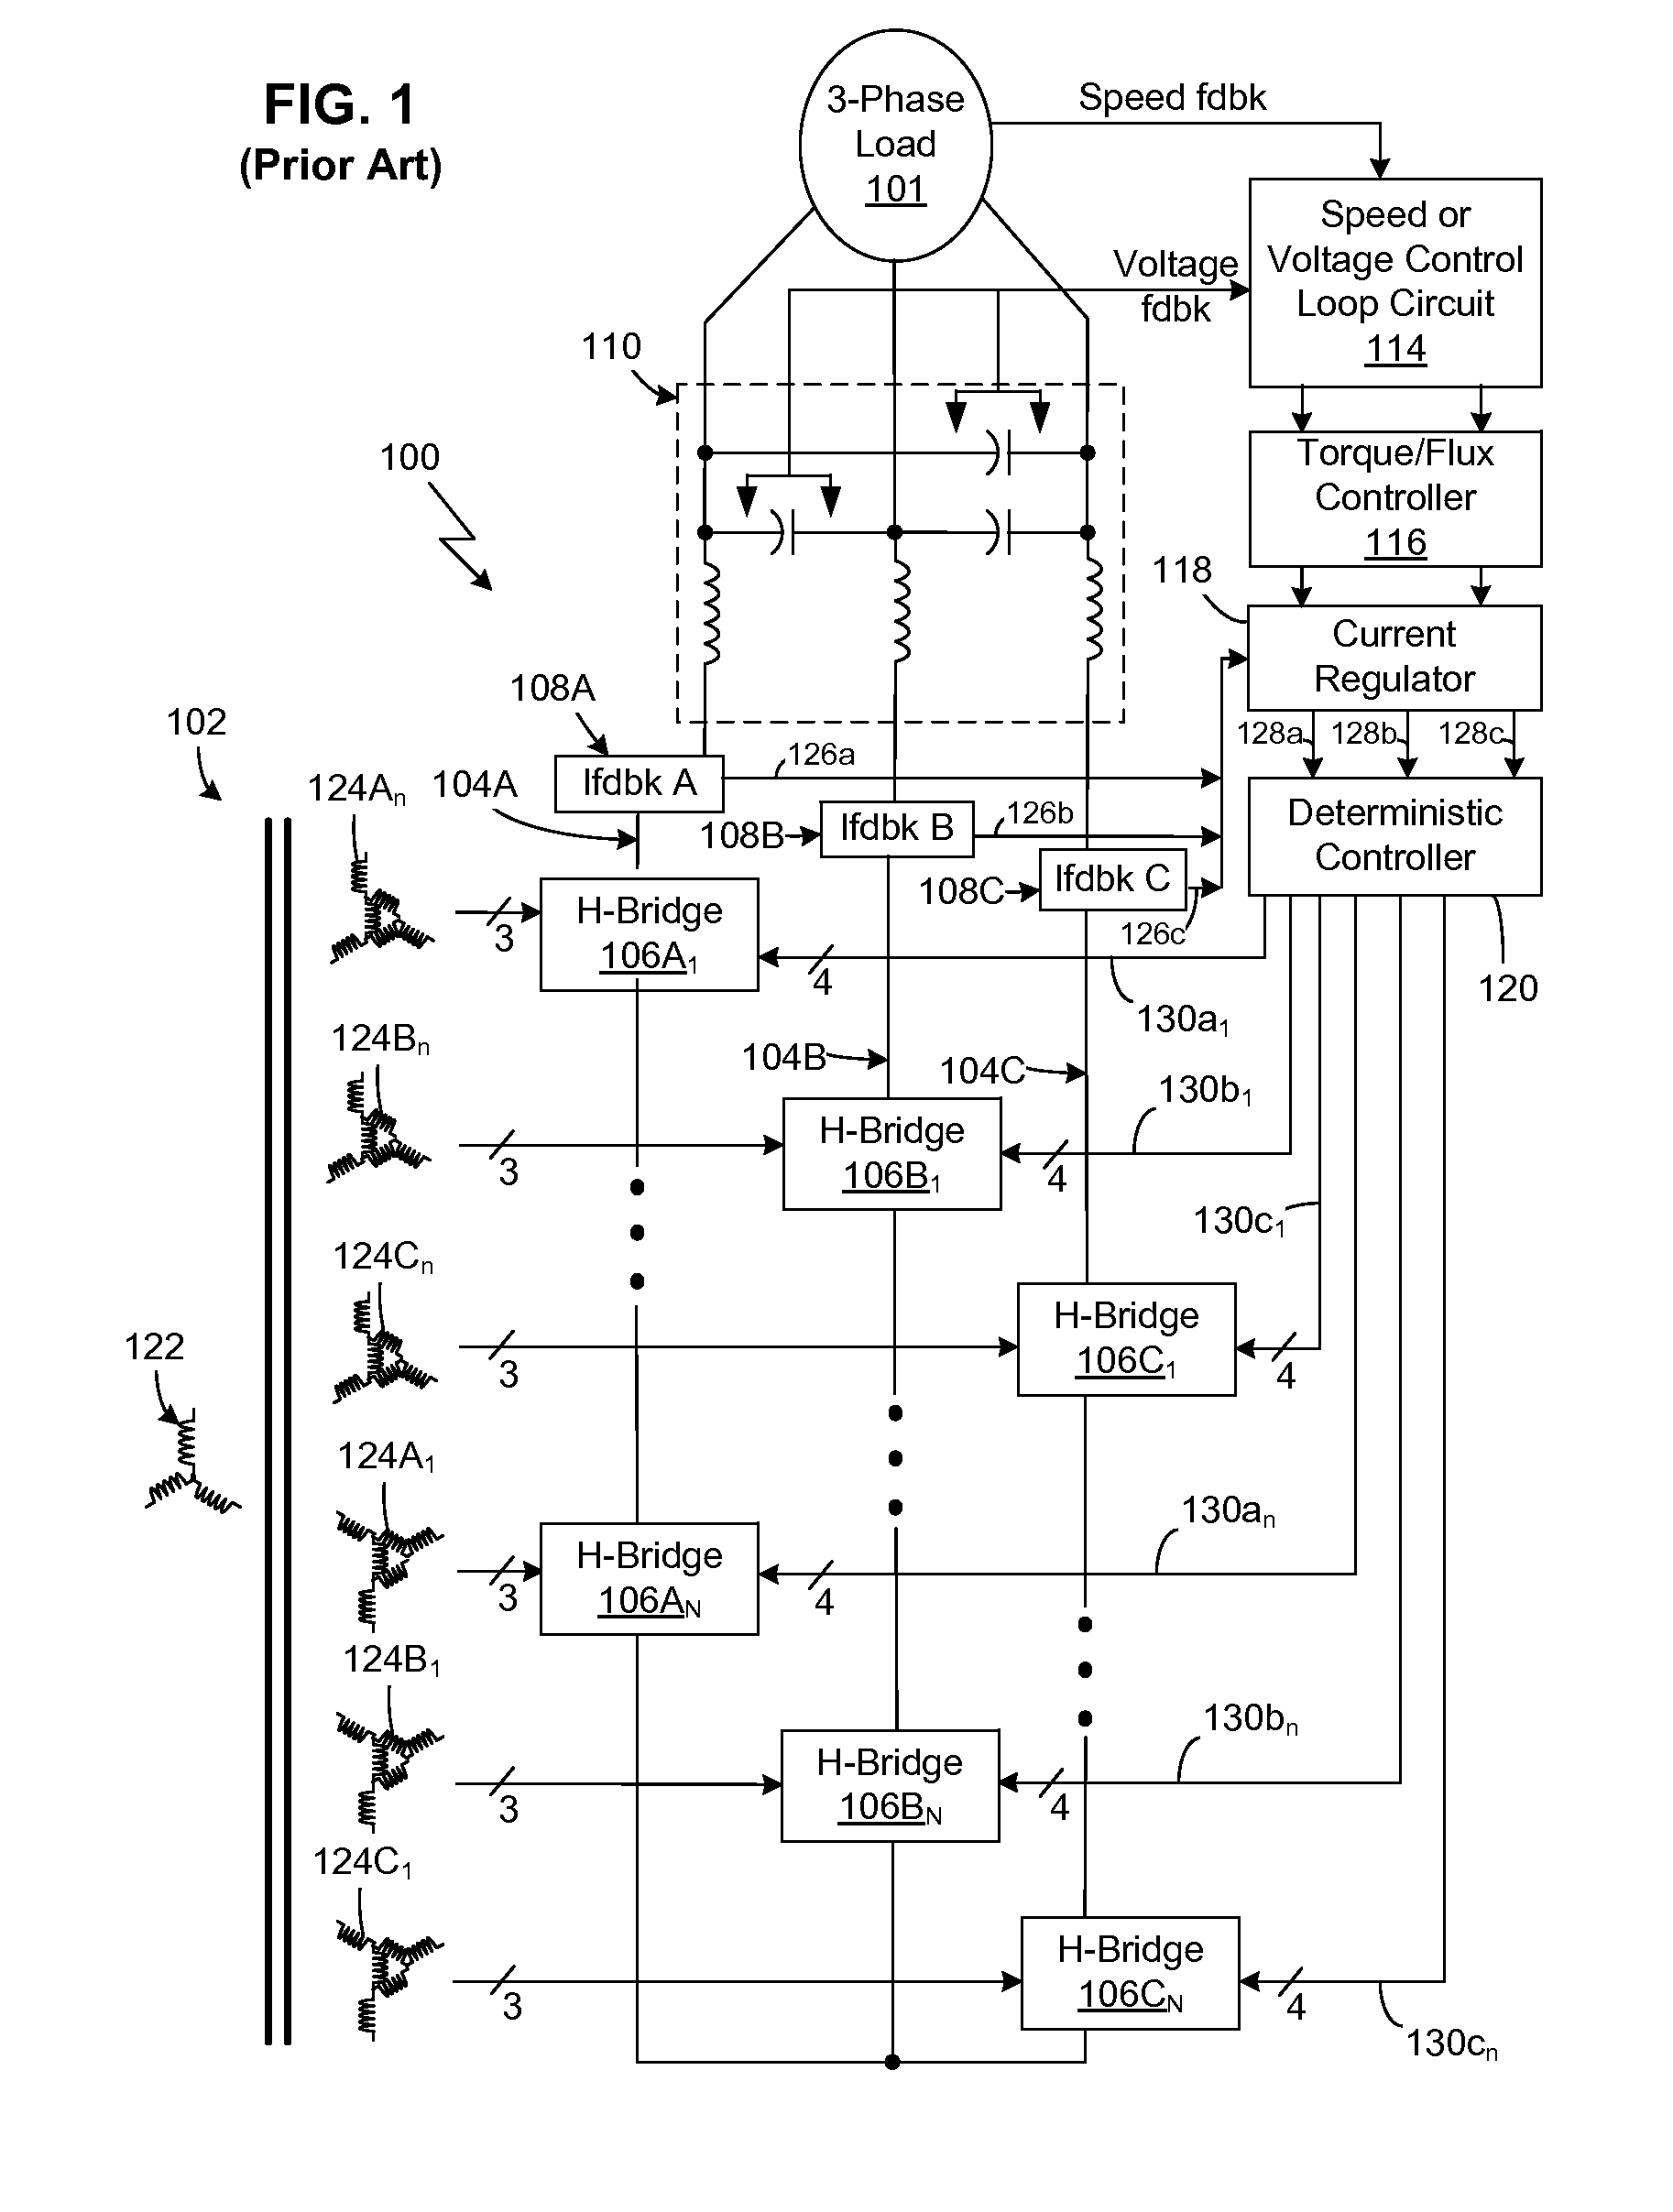 Voltage Drive System With Hysteretic Current Control And Method Of Operating The Same